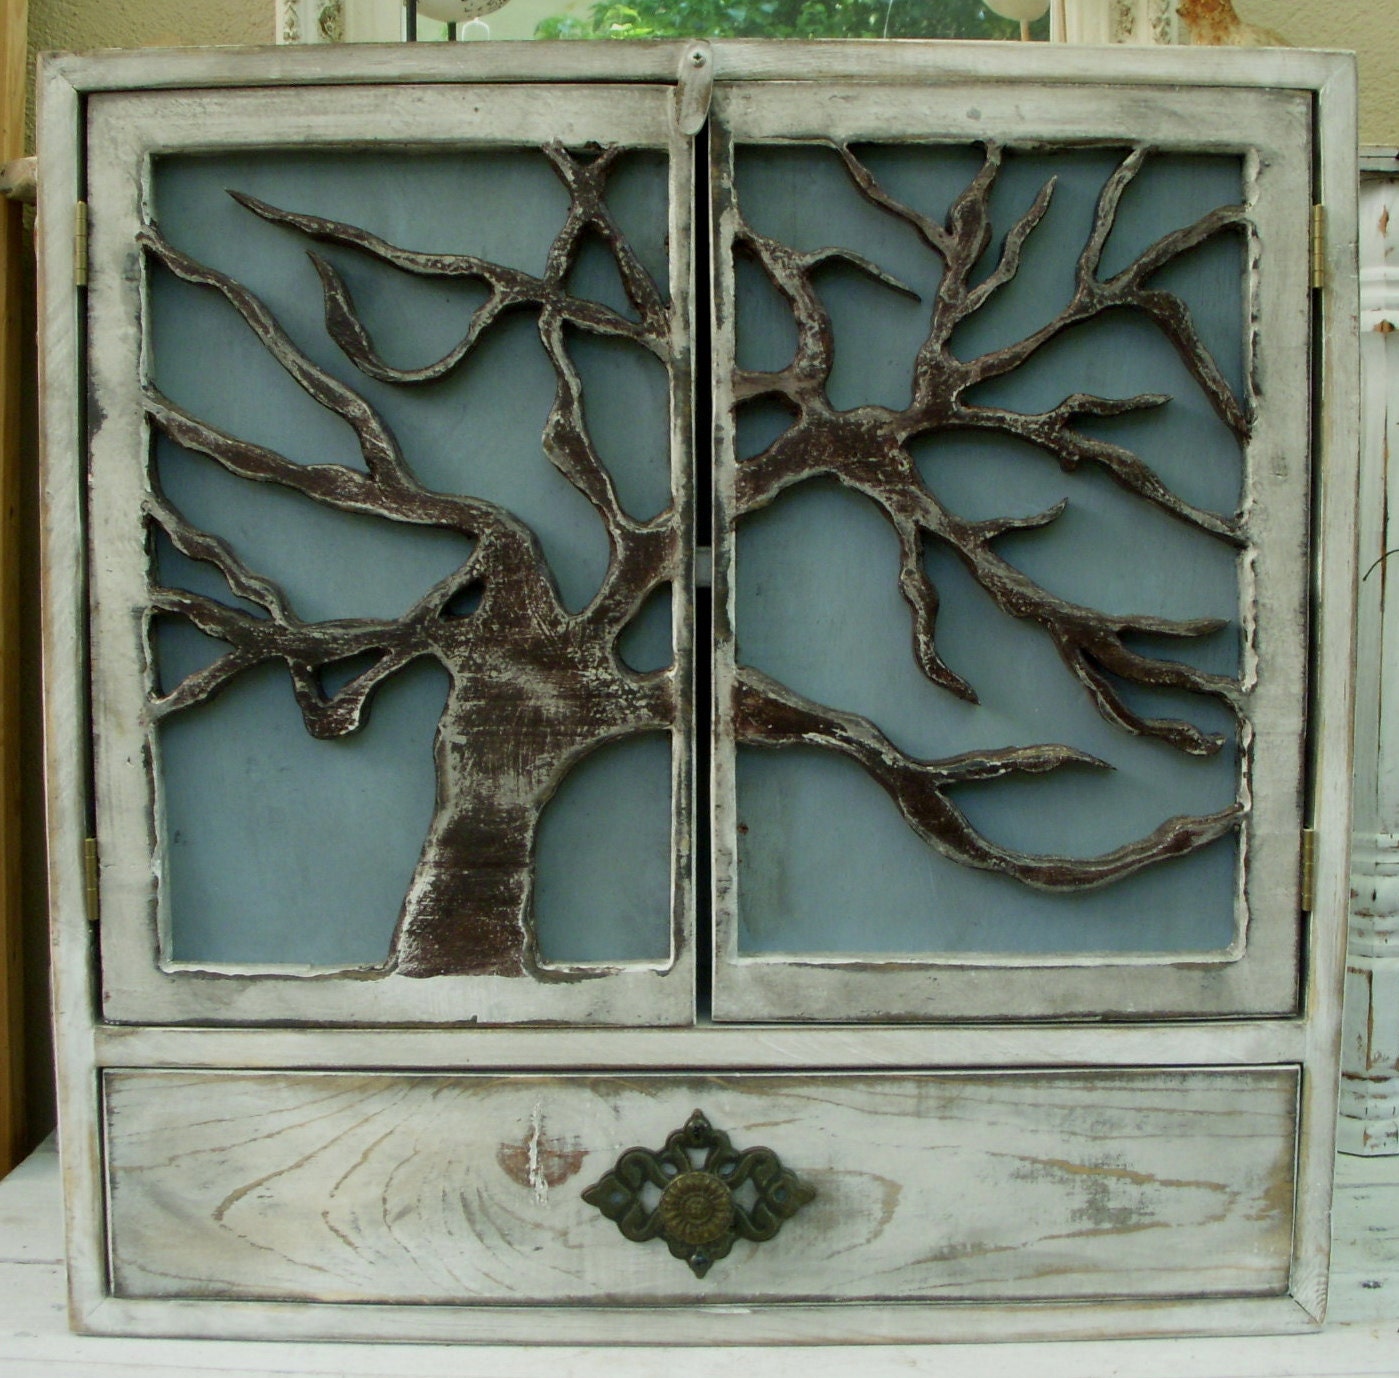 Handmade Wooden Cabinet - Wood Cabinet With Carved Oak Tree Doors